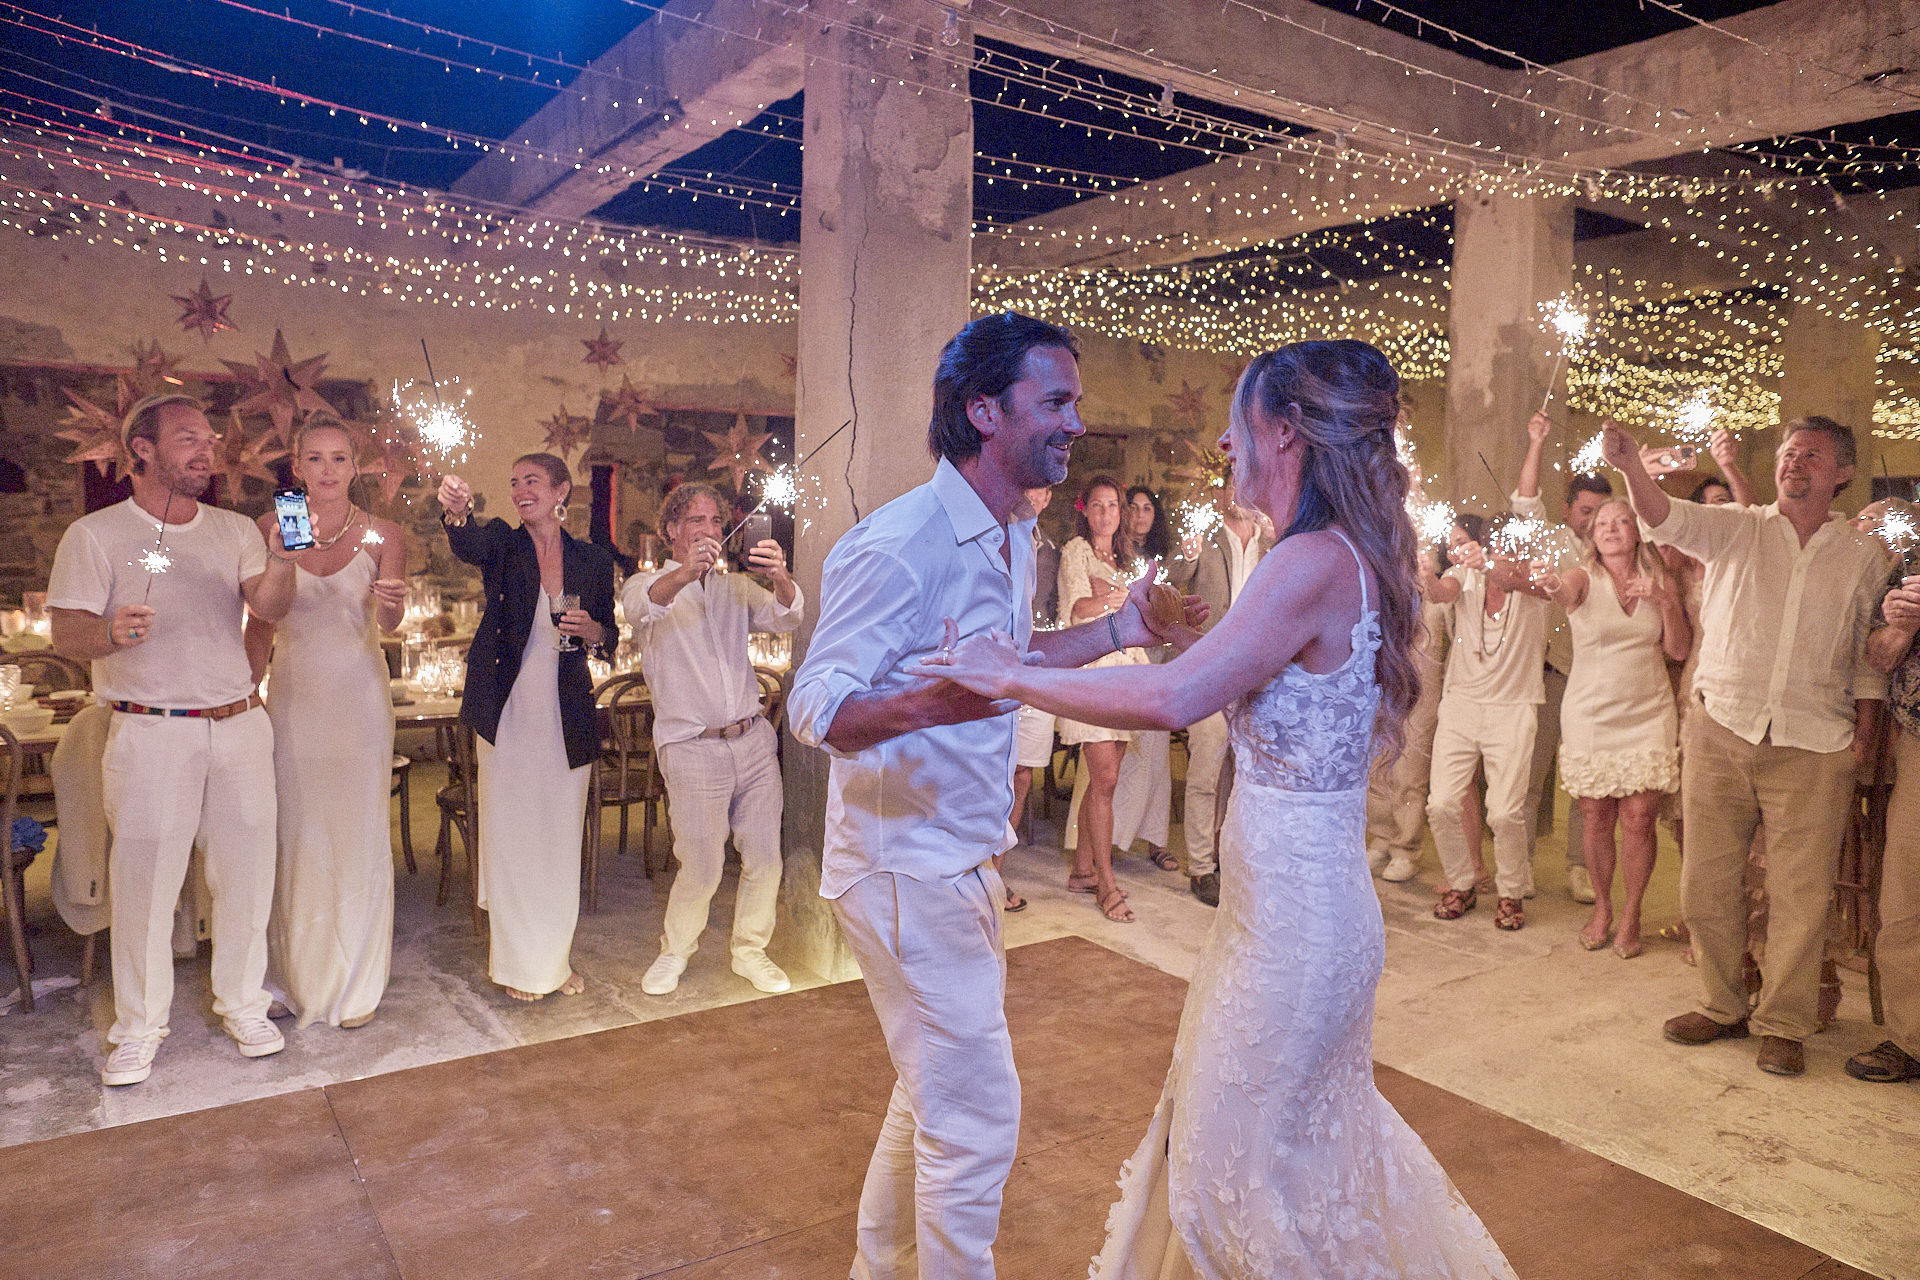 A Bride And Groom Dancing In Front Of A Crowd Of People.